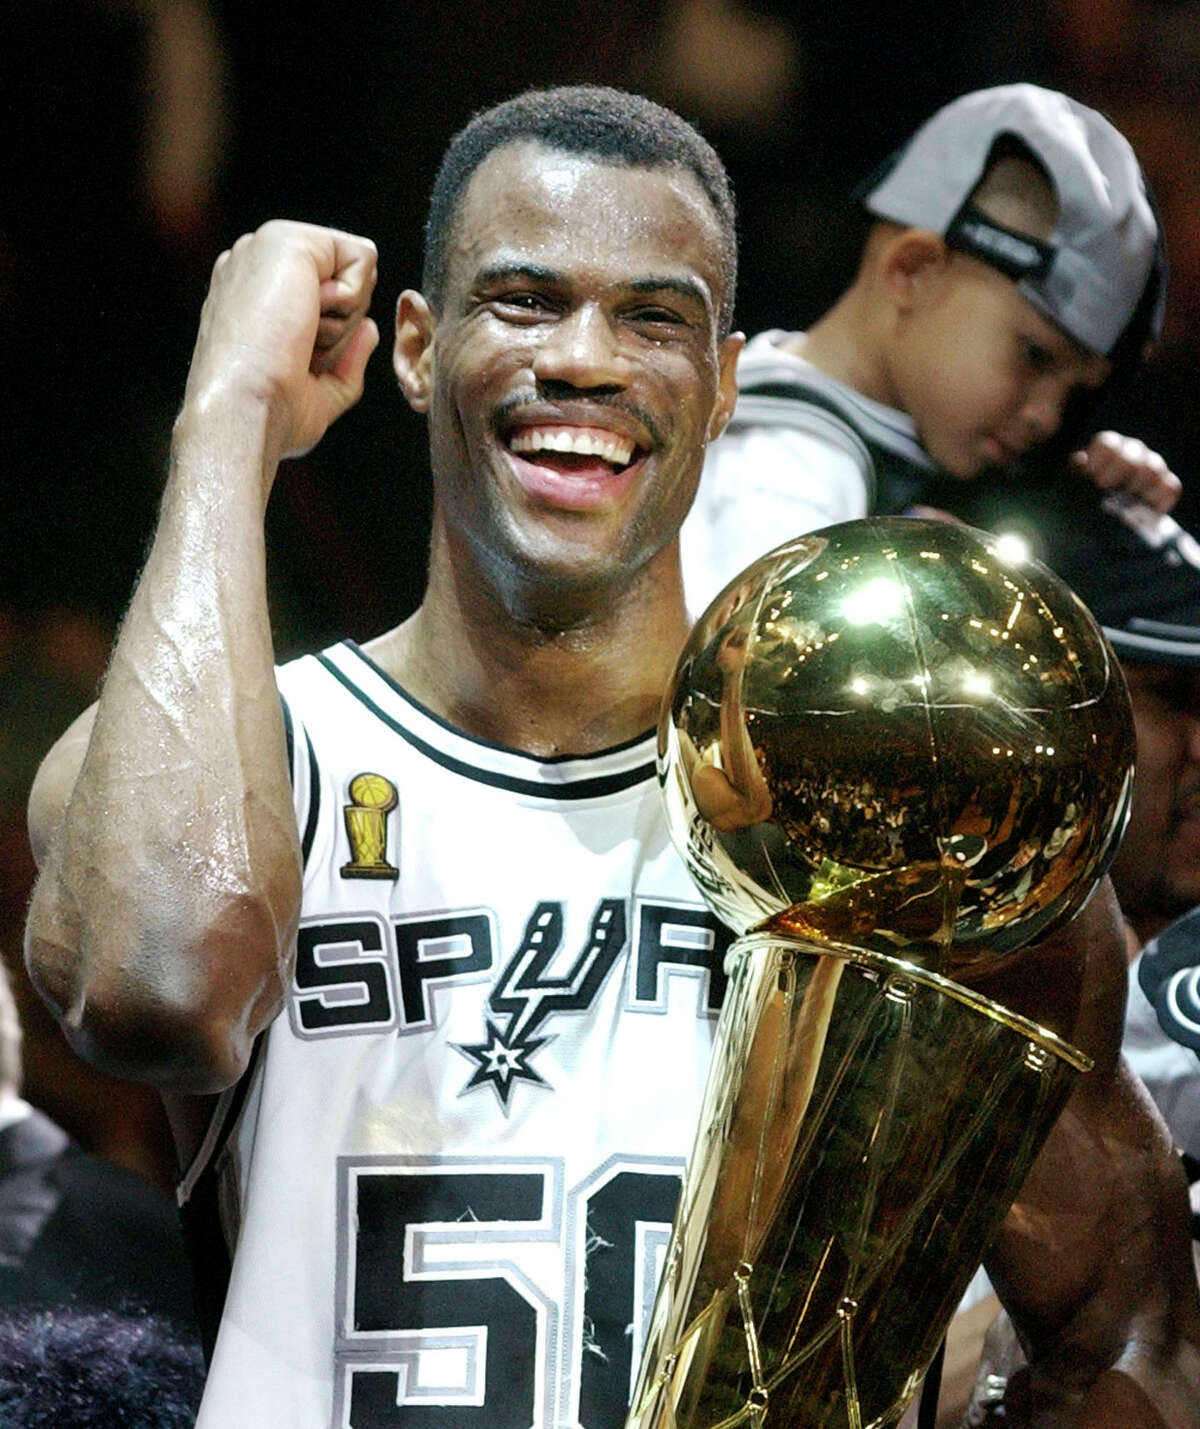 In this June 15, 2003 file photo, center David Robinson holds the NBA championship trophy after the Spurs beat the New Jersey Nets 88-77 in Game 6 of the NBA Finals in San Antonio.